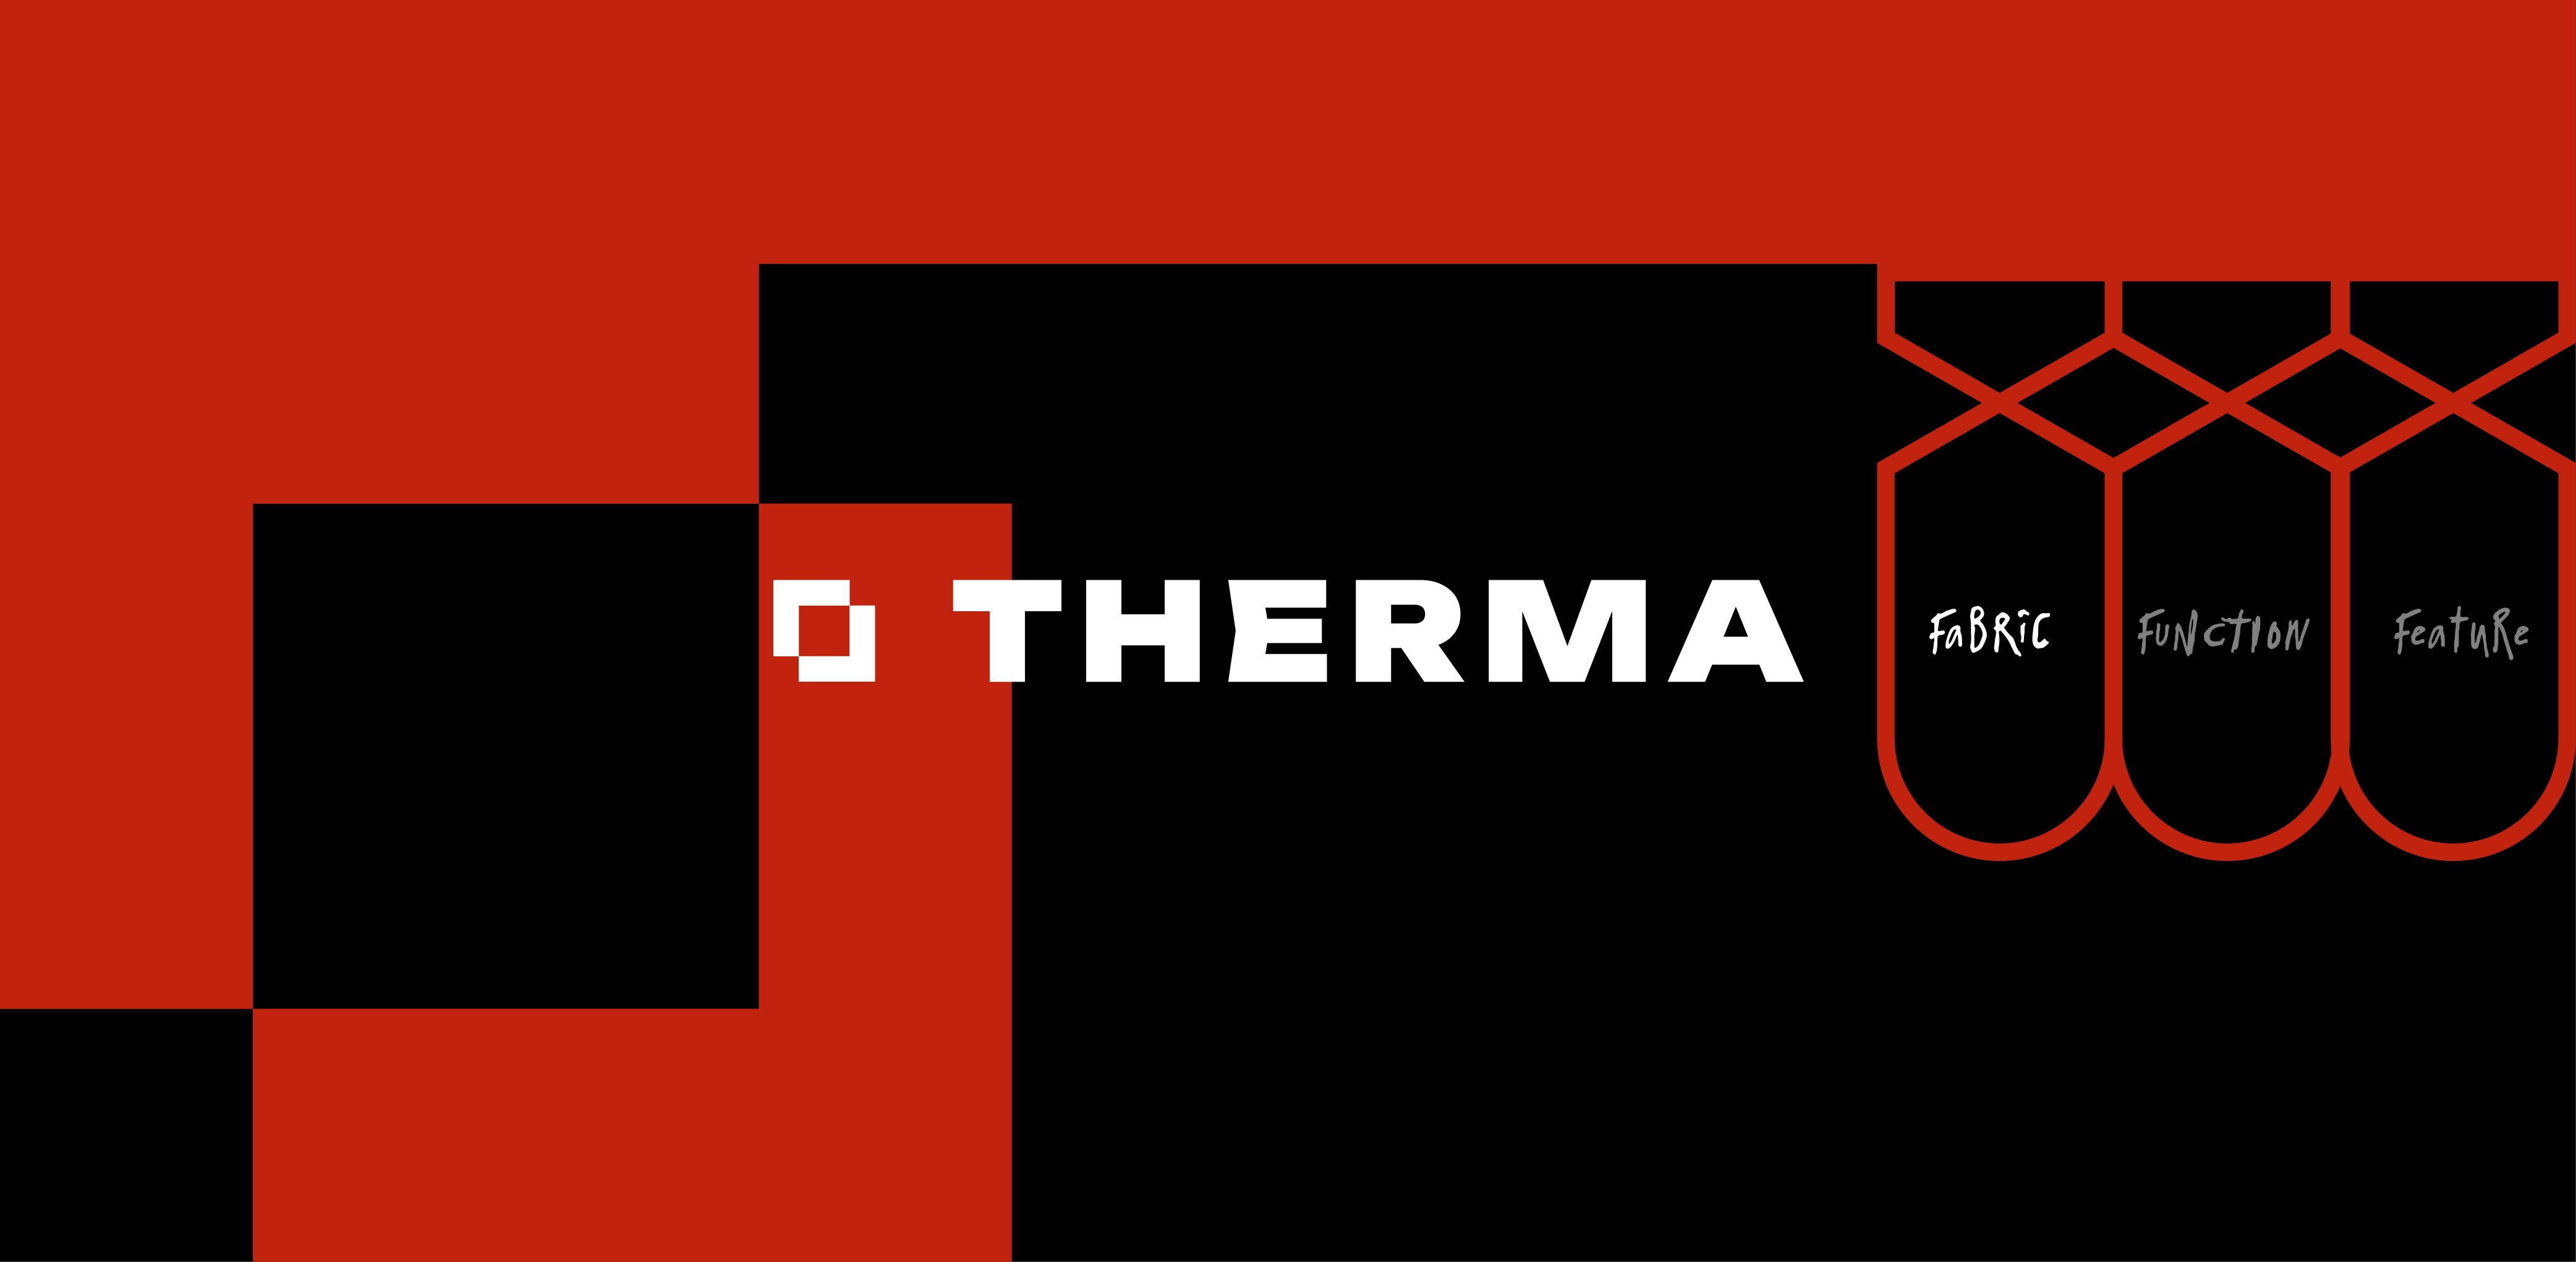 Therma Fabric Function Feature